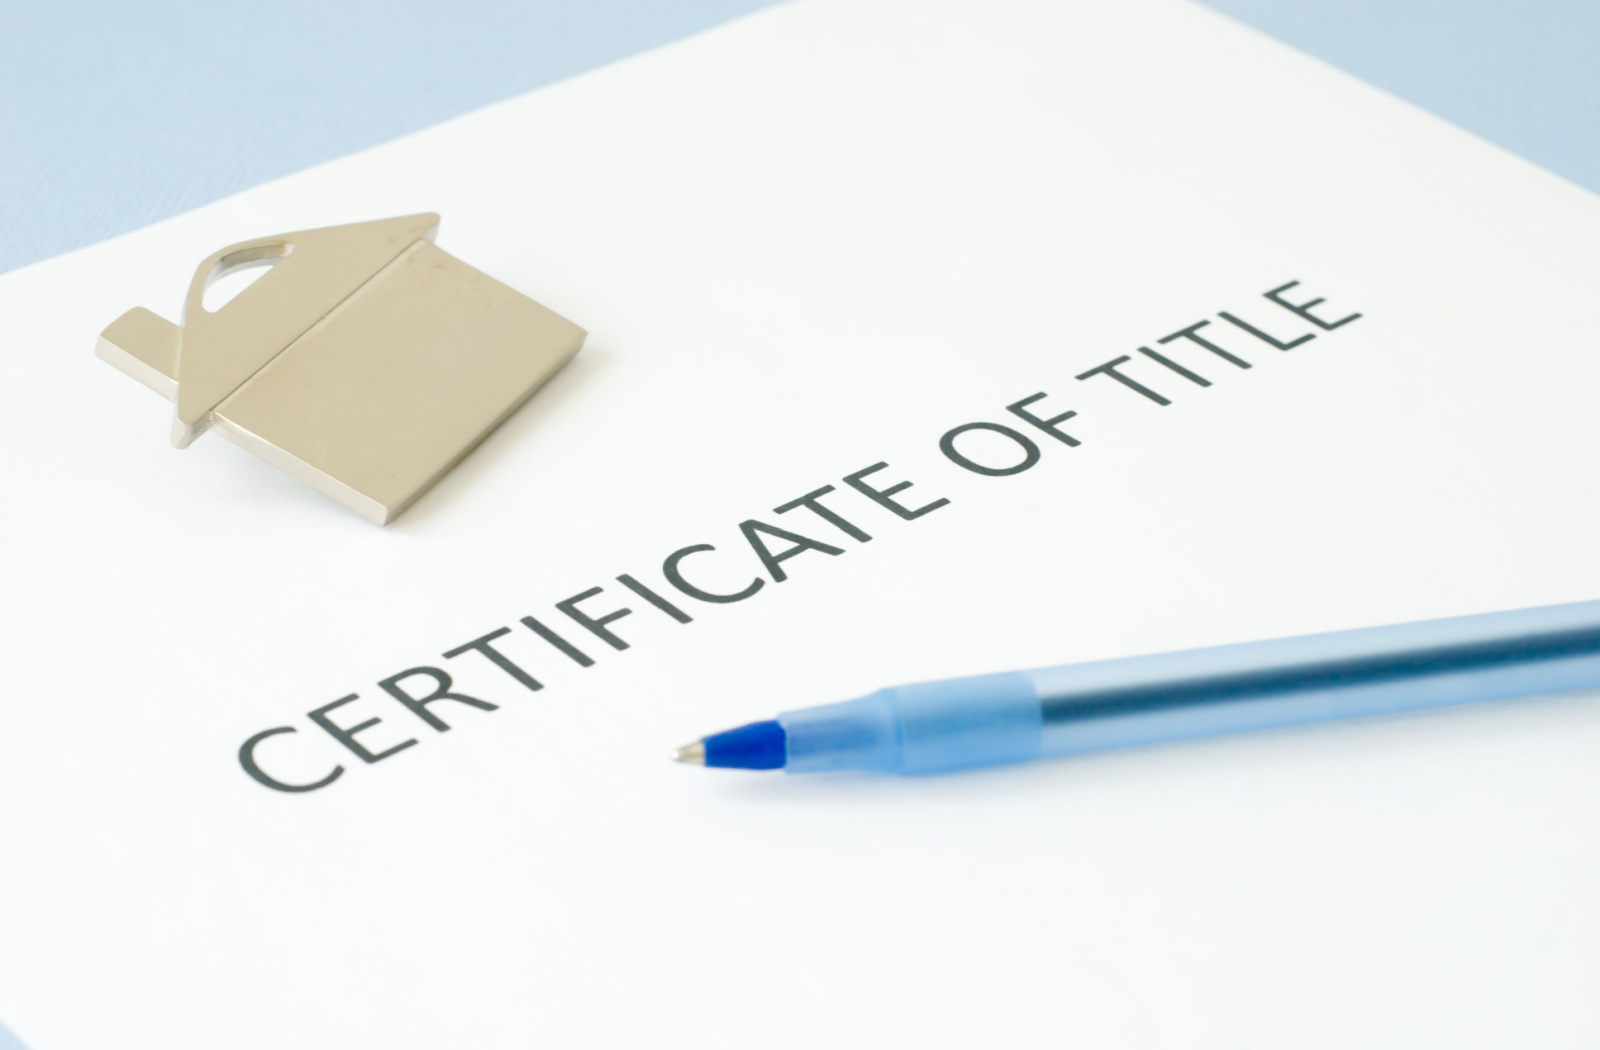 A close up of a piece of paper that says "certificate of title" on a desk with a pen and a small figure of a house.